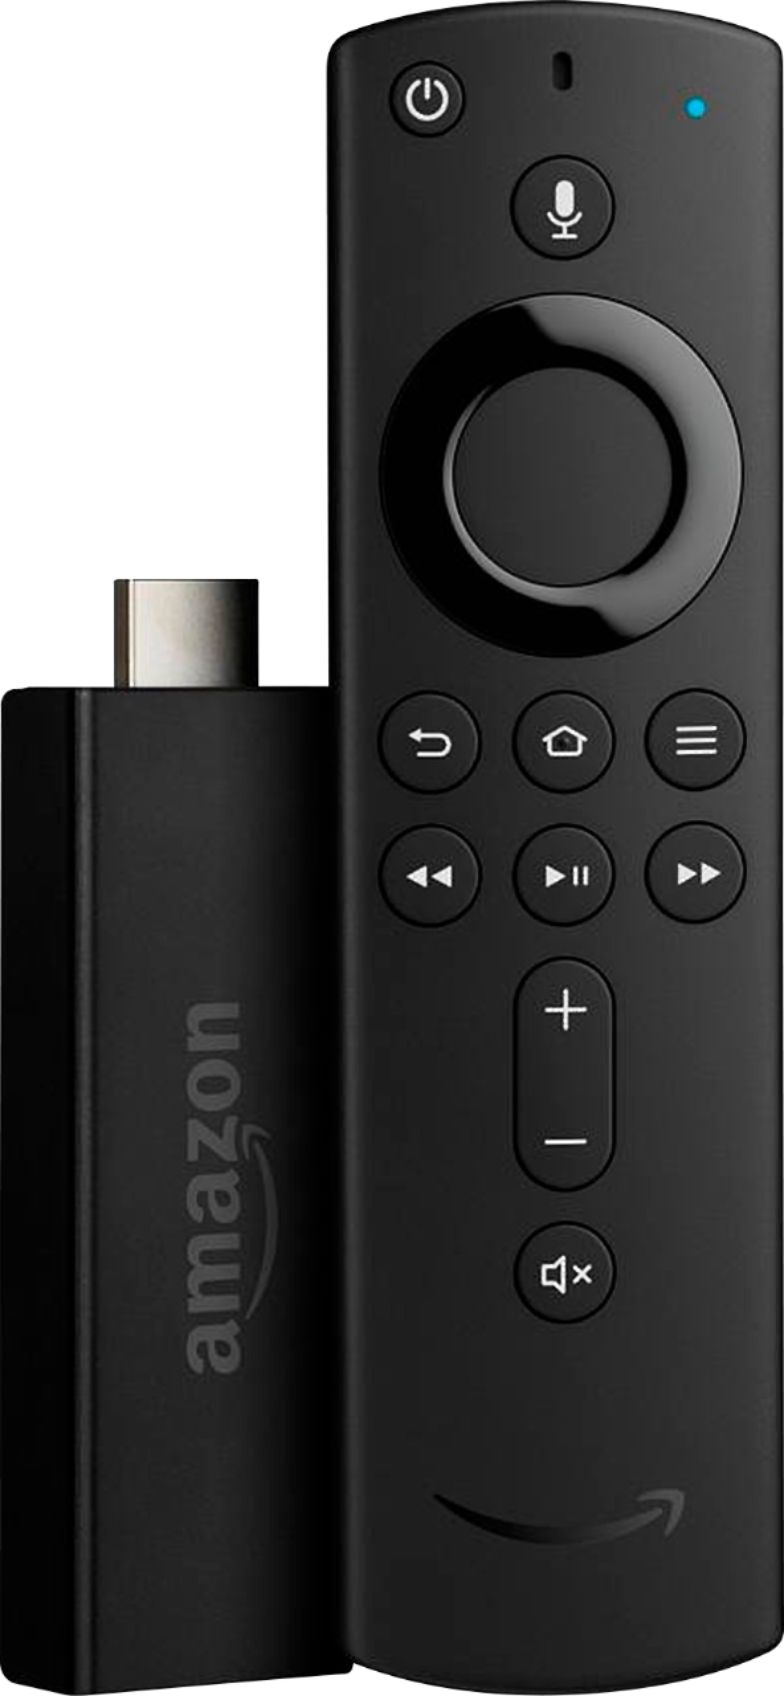 fire stick and amazon